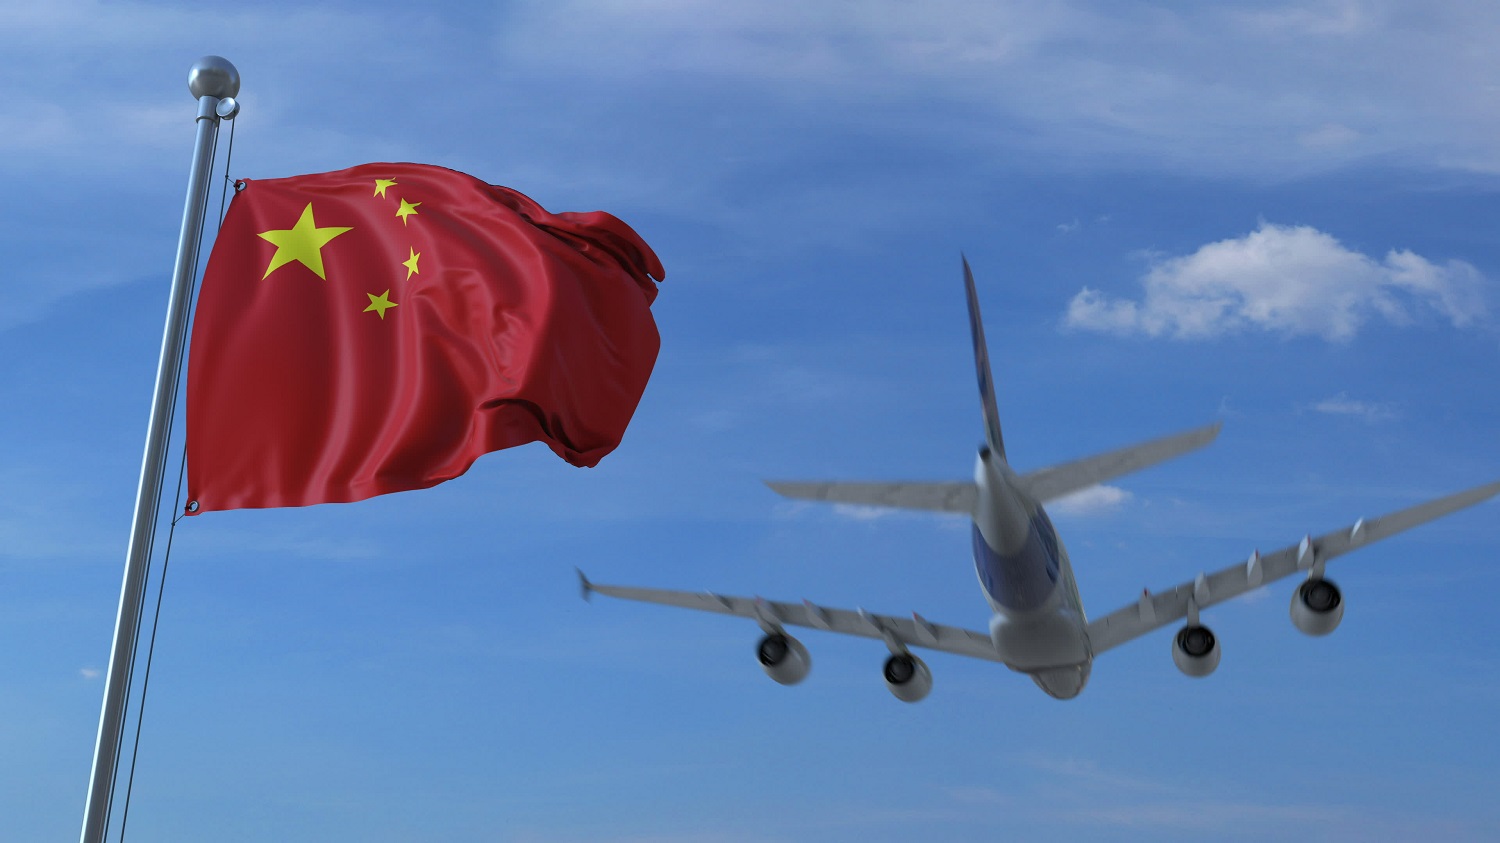 A commercial plane flies behind a Chinese flag waving in the wind.